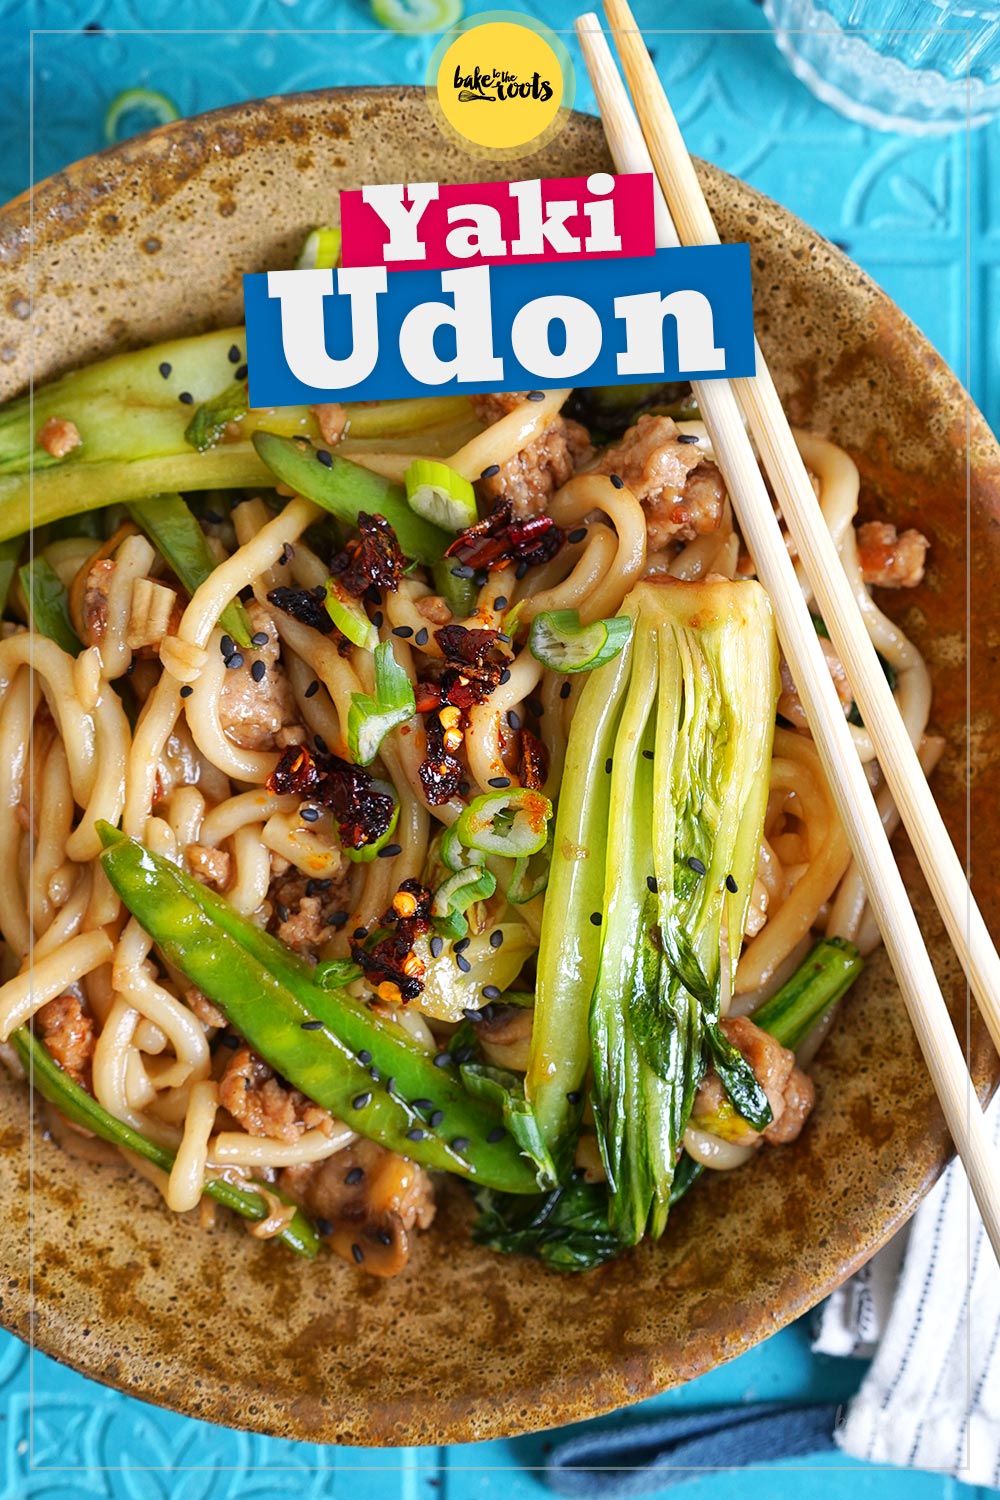 Yaki Udon with Pork | Bake to the roots